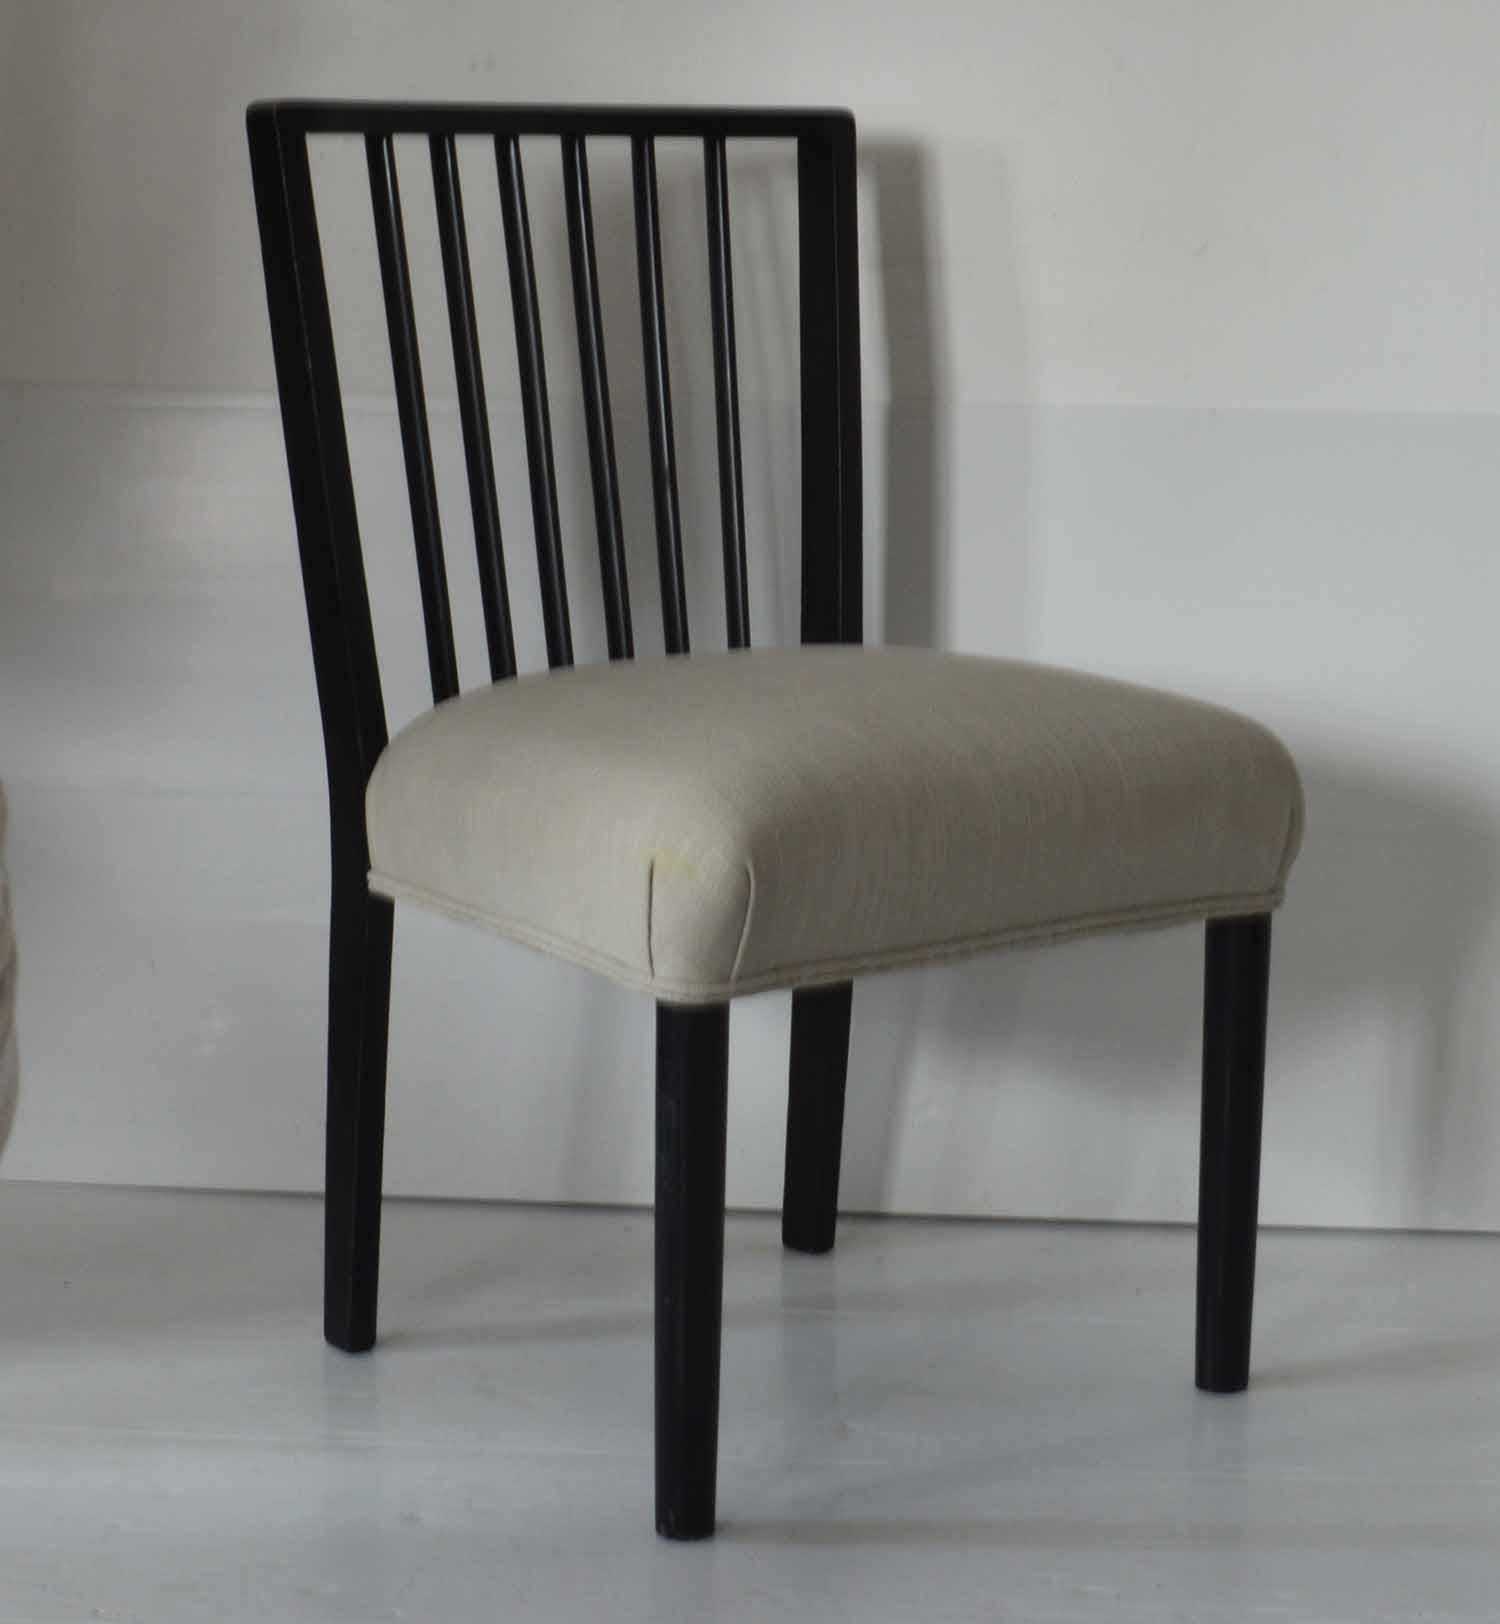 Most unusual and very stylish side chair.

Designer unknown.

In the style of transitional from Secessionist to Art Deco

Made from tropical hardwood* and have been re-ebonized.

Re-upholstered in pale grey linen.

*Because the timber is antique